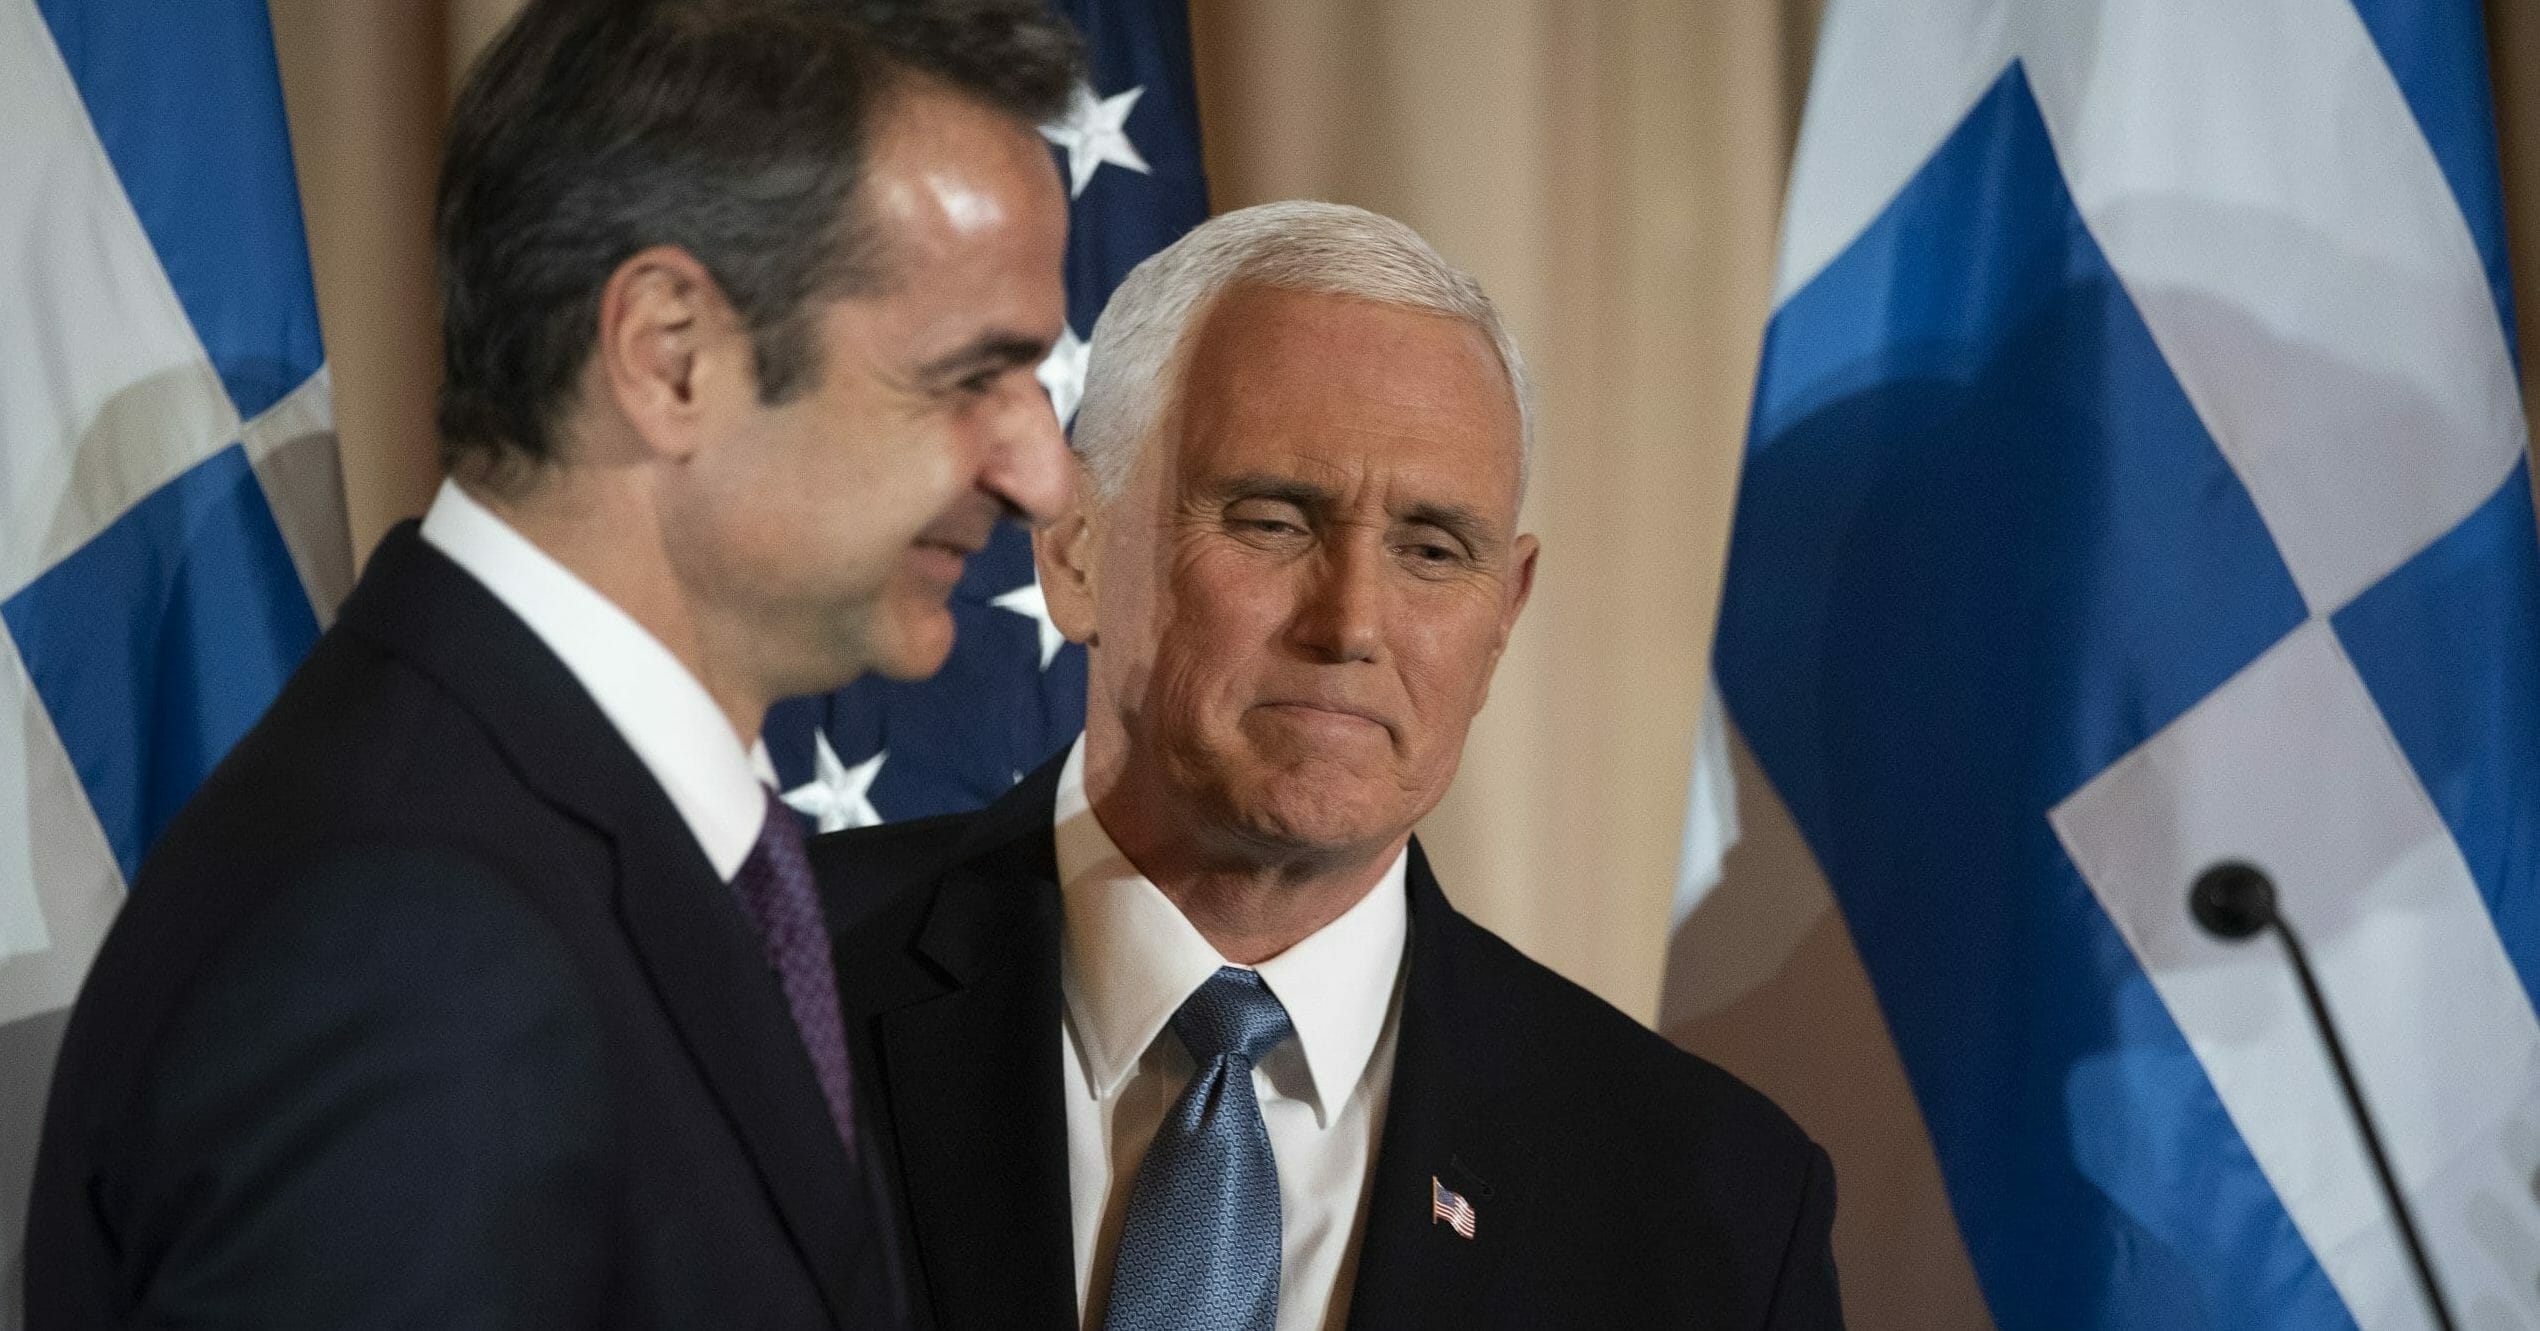 Vice President Mike Pence, right, and Greek Prime Minister Kyriakos Mitsotakis appear at a reception at the State Department in Washington on Jan. 8, 2020.